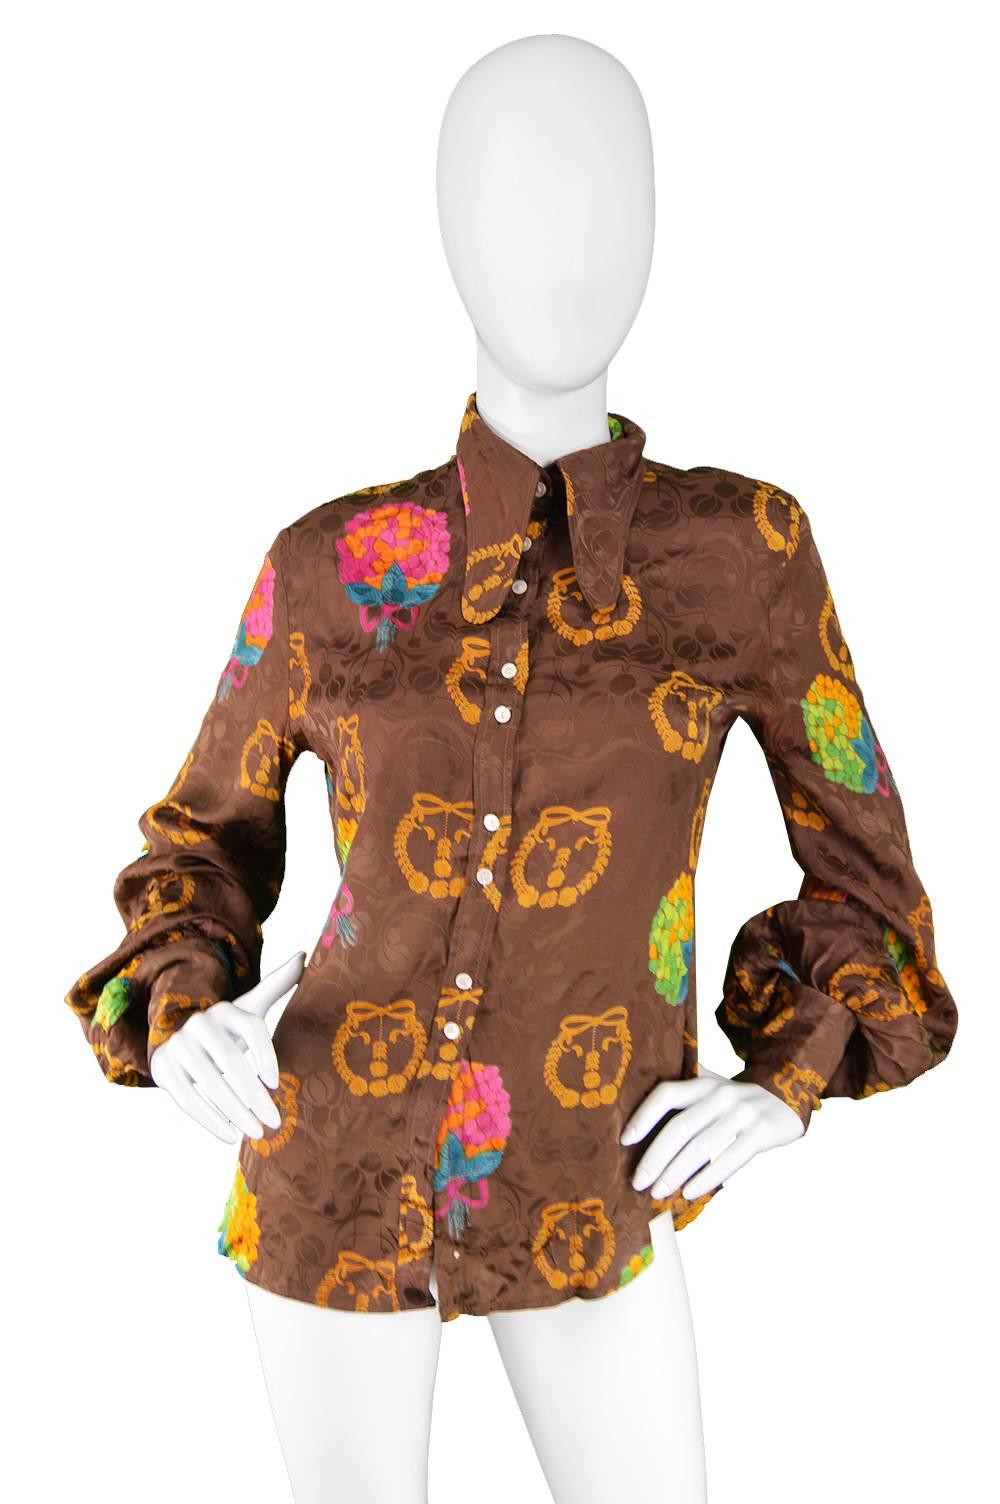 Jeff Banks Vintage Balloon Sleeve Satin Jacquard Beagle Collar Blouse, 1970s

Estimated Size: UK 10-12/ US 6-8/ EU 3840 due to intended loose fit and cuff holes are quite small. 
Bust - 38” / 96cm
Waist - 32” / 81cm
Length (Shoulder to Hem) - 23” /